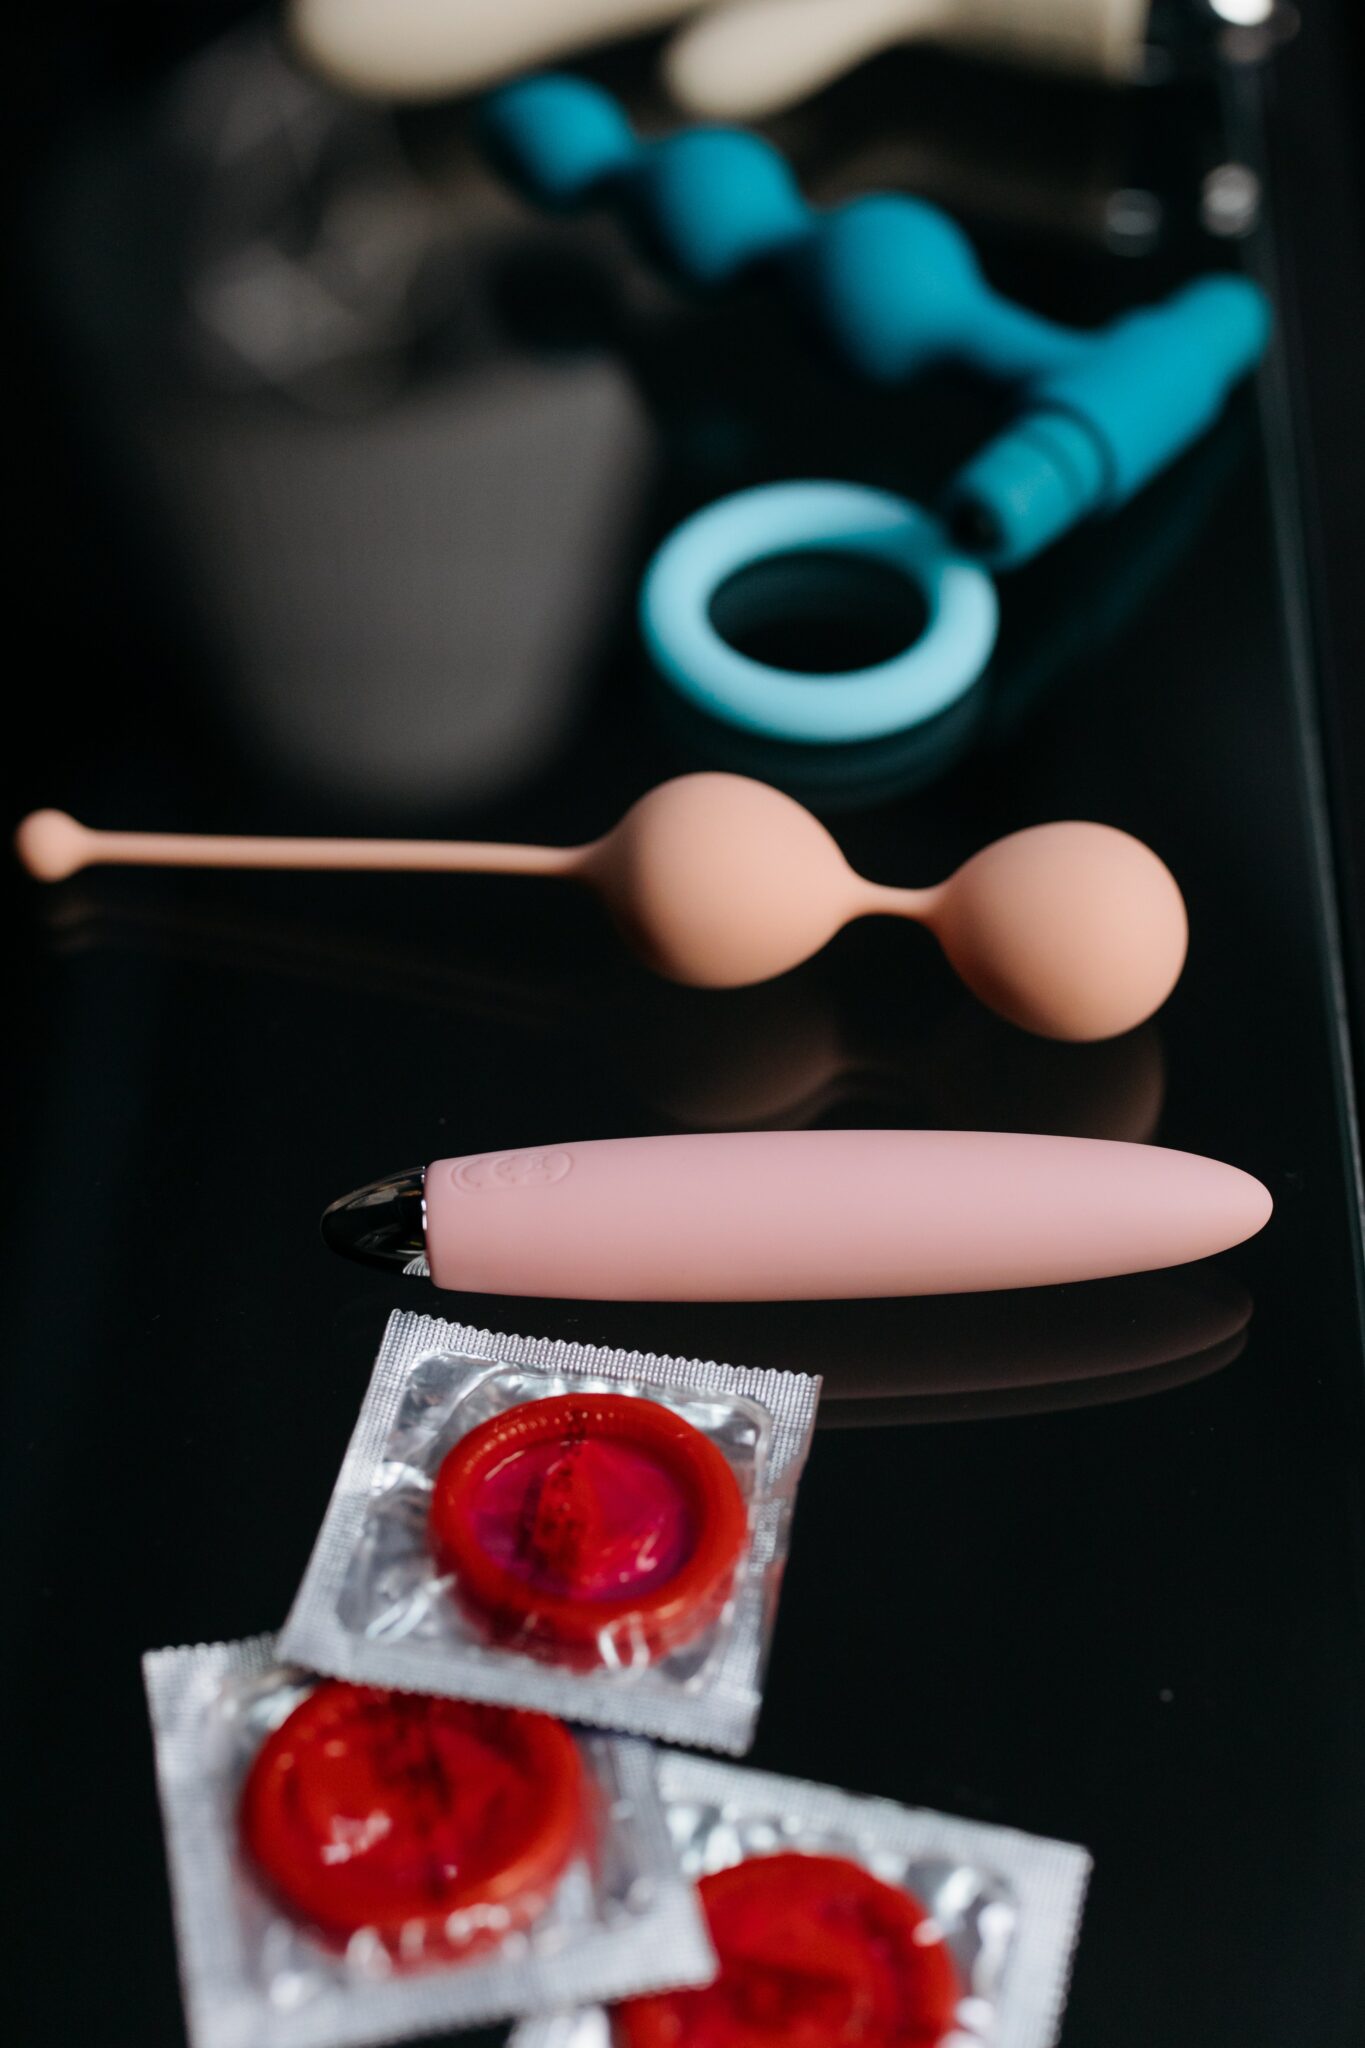 A variety of sex toys including anal beads, vibrators and condoms.